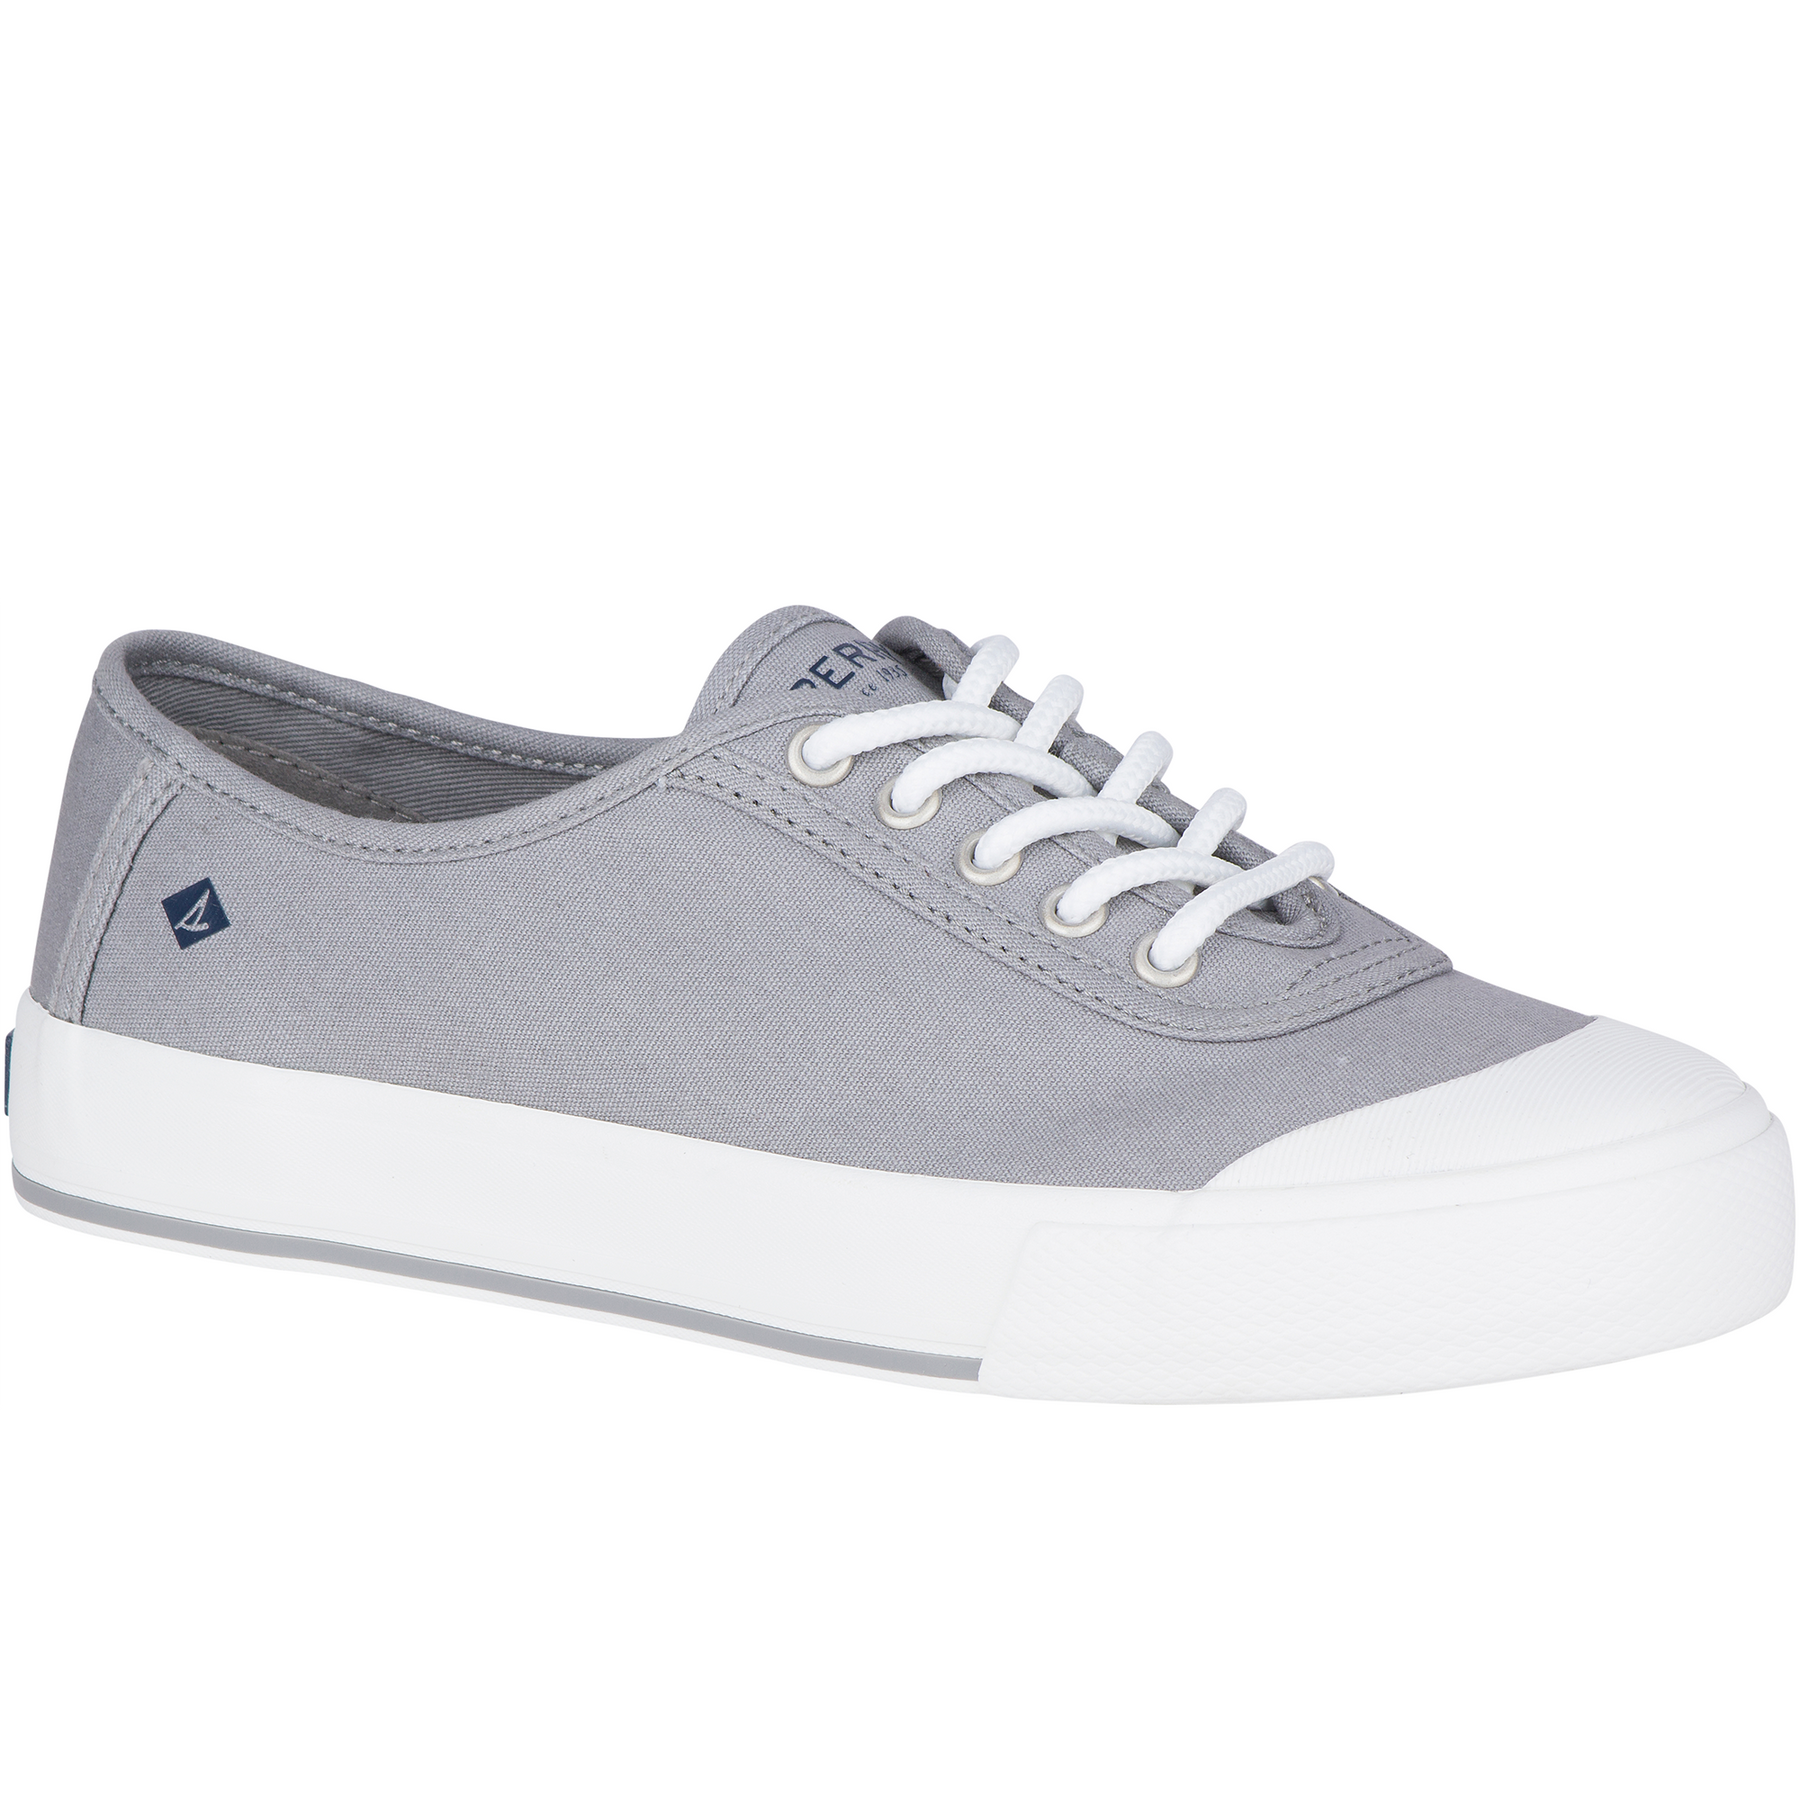 Women's Crest Edge Saturated Grey Sneakers (STS83749)